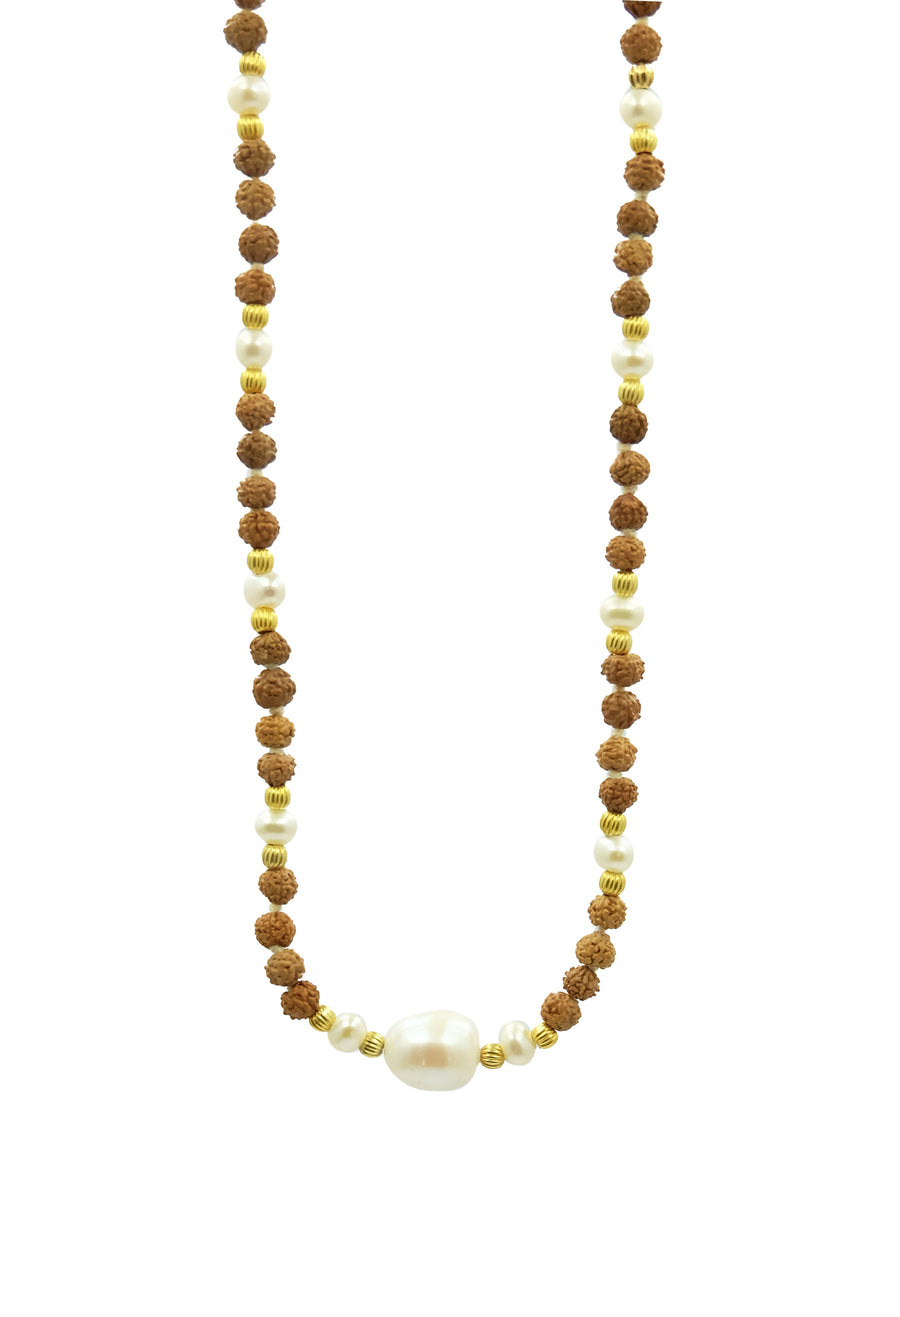 Mystic Moonlight is a choker length necklace hand-made from rudraksha seeds, pearls and 22k gold accents.